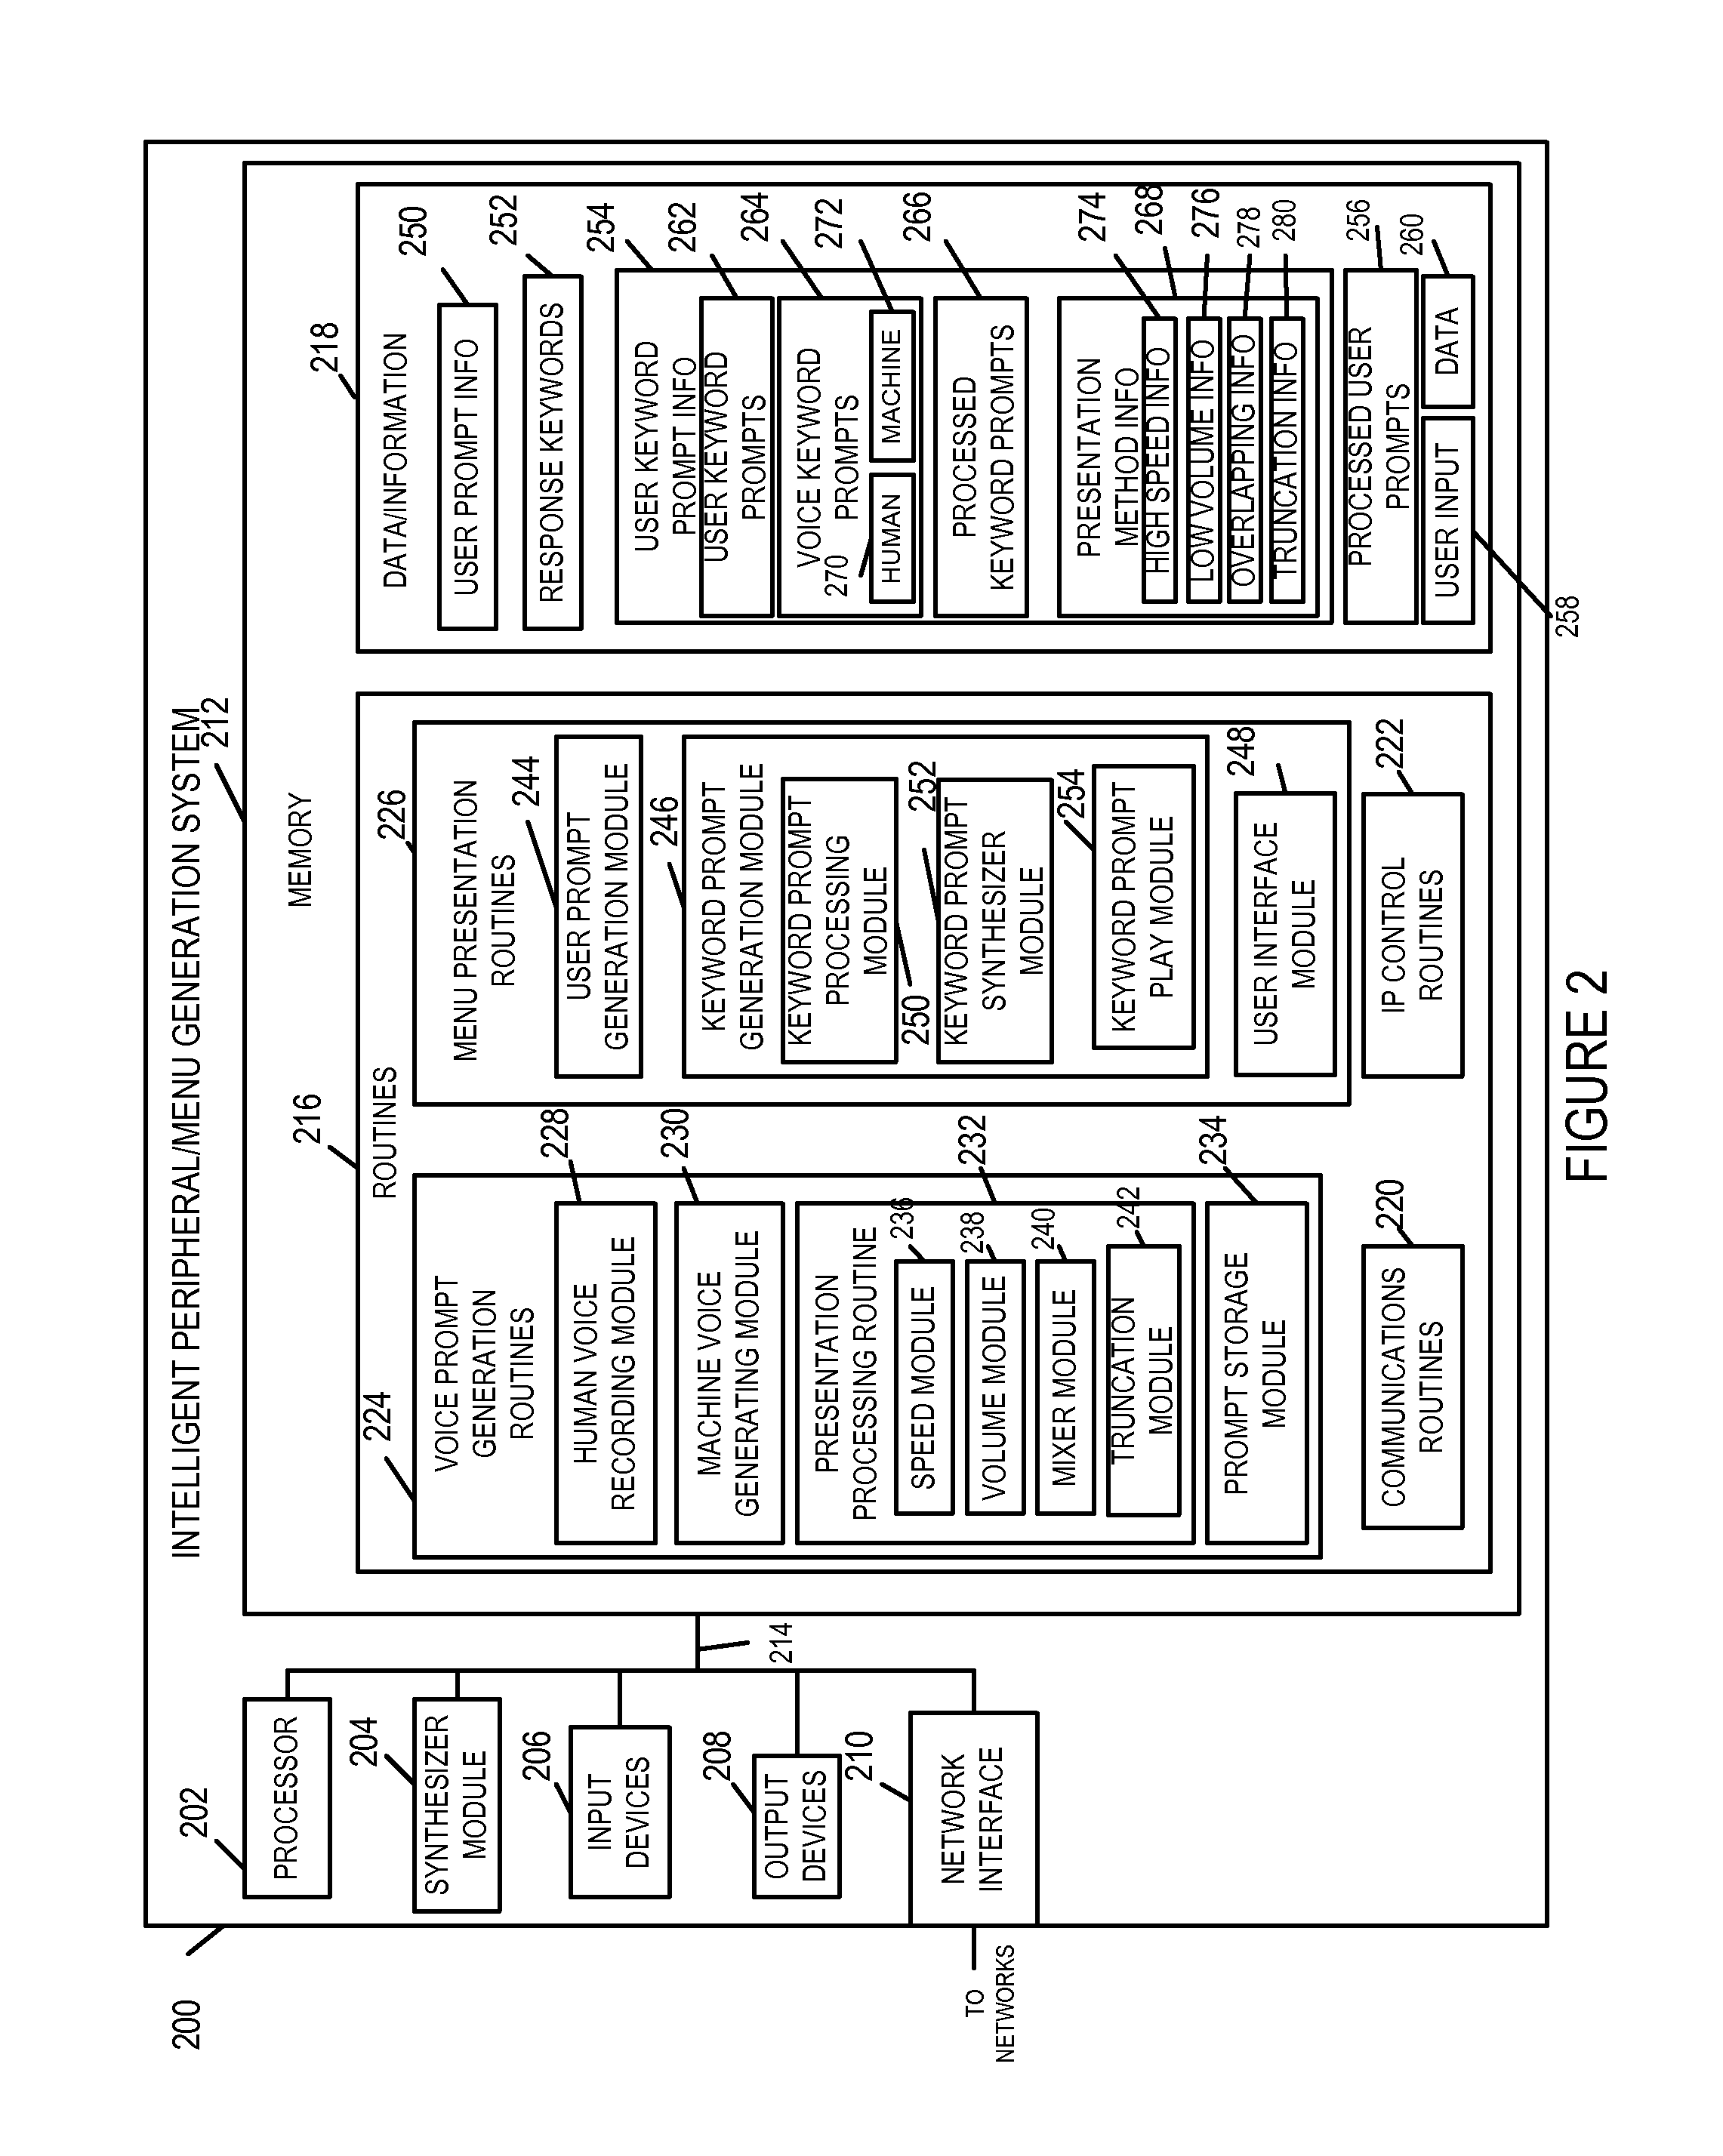 Enhanced interface for use with speech recognition